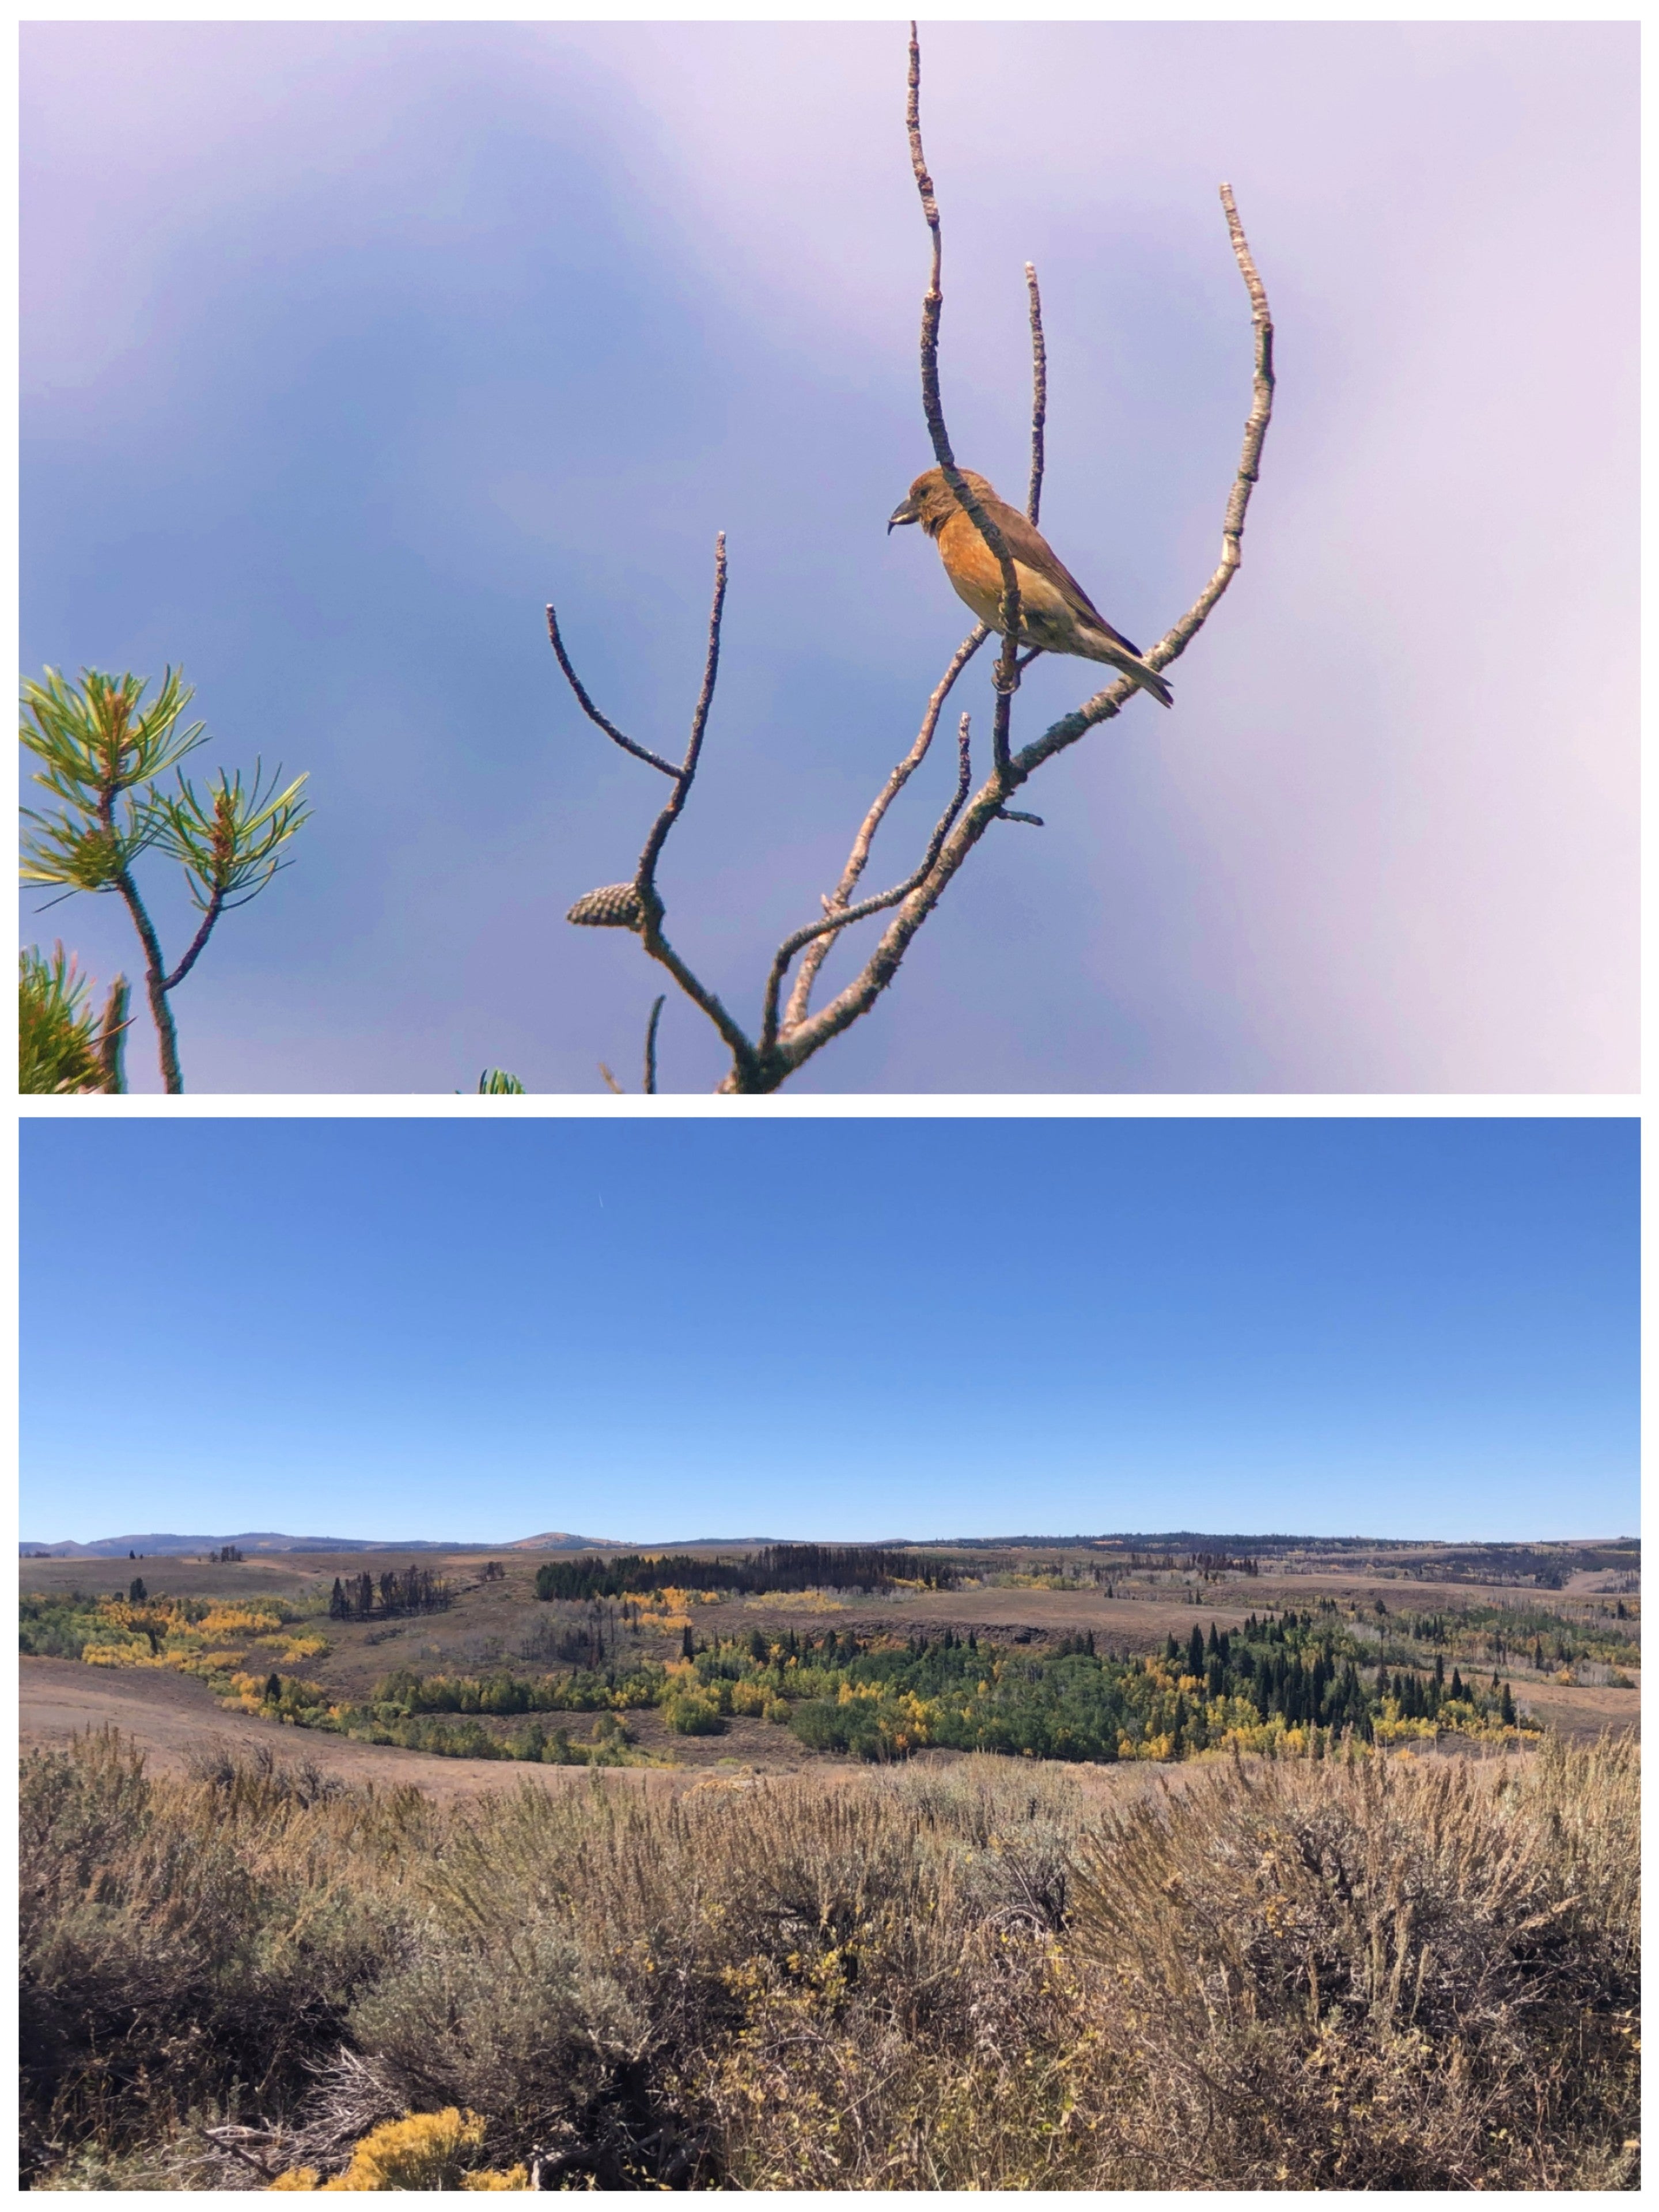 Collage picture. Top picture is of a reddish bird perched on a dead tree branch. Bottom picture is of landscape that has shrubs and grass on it